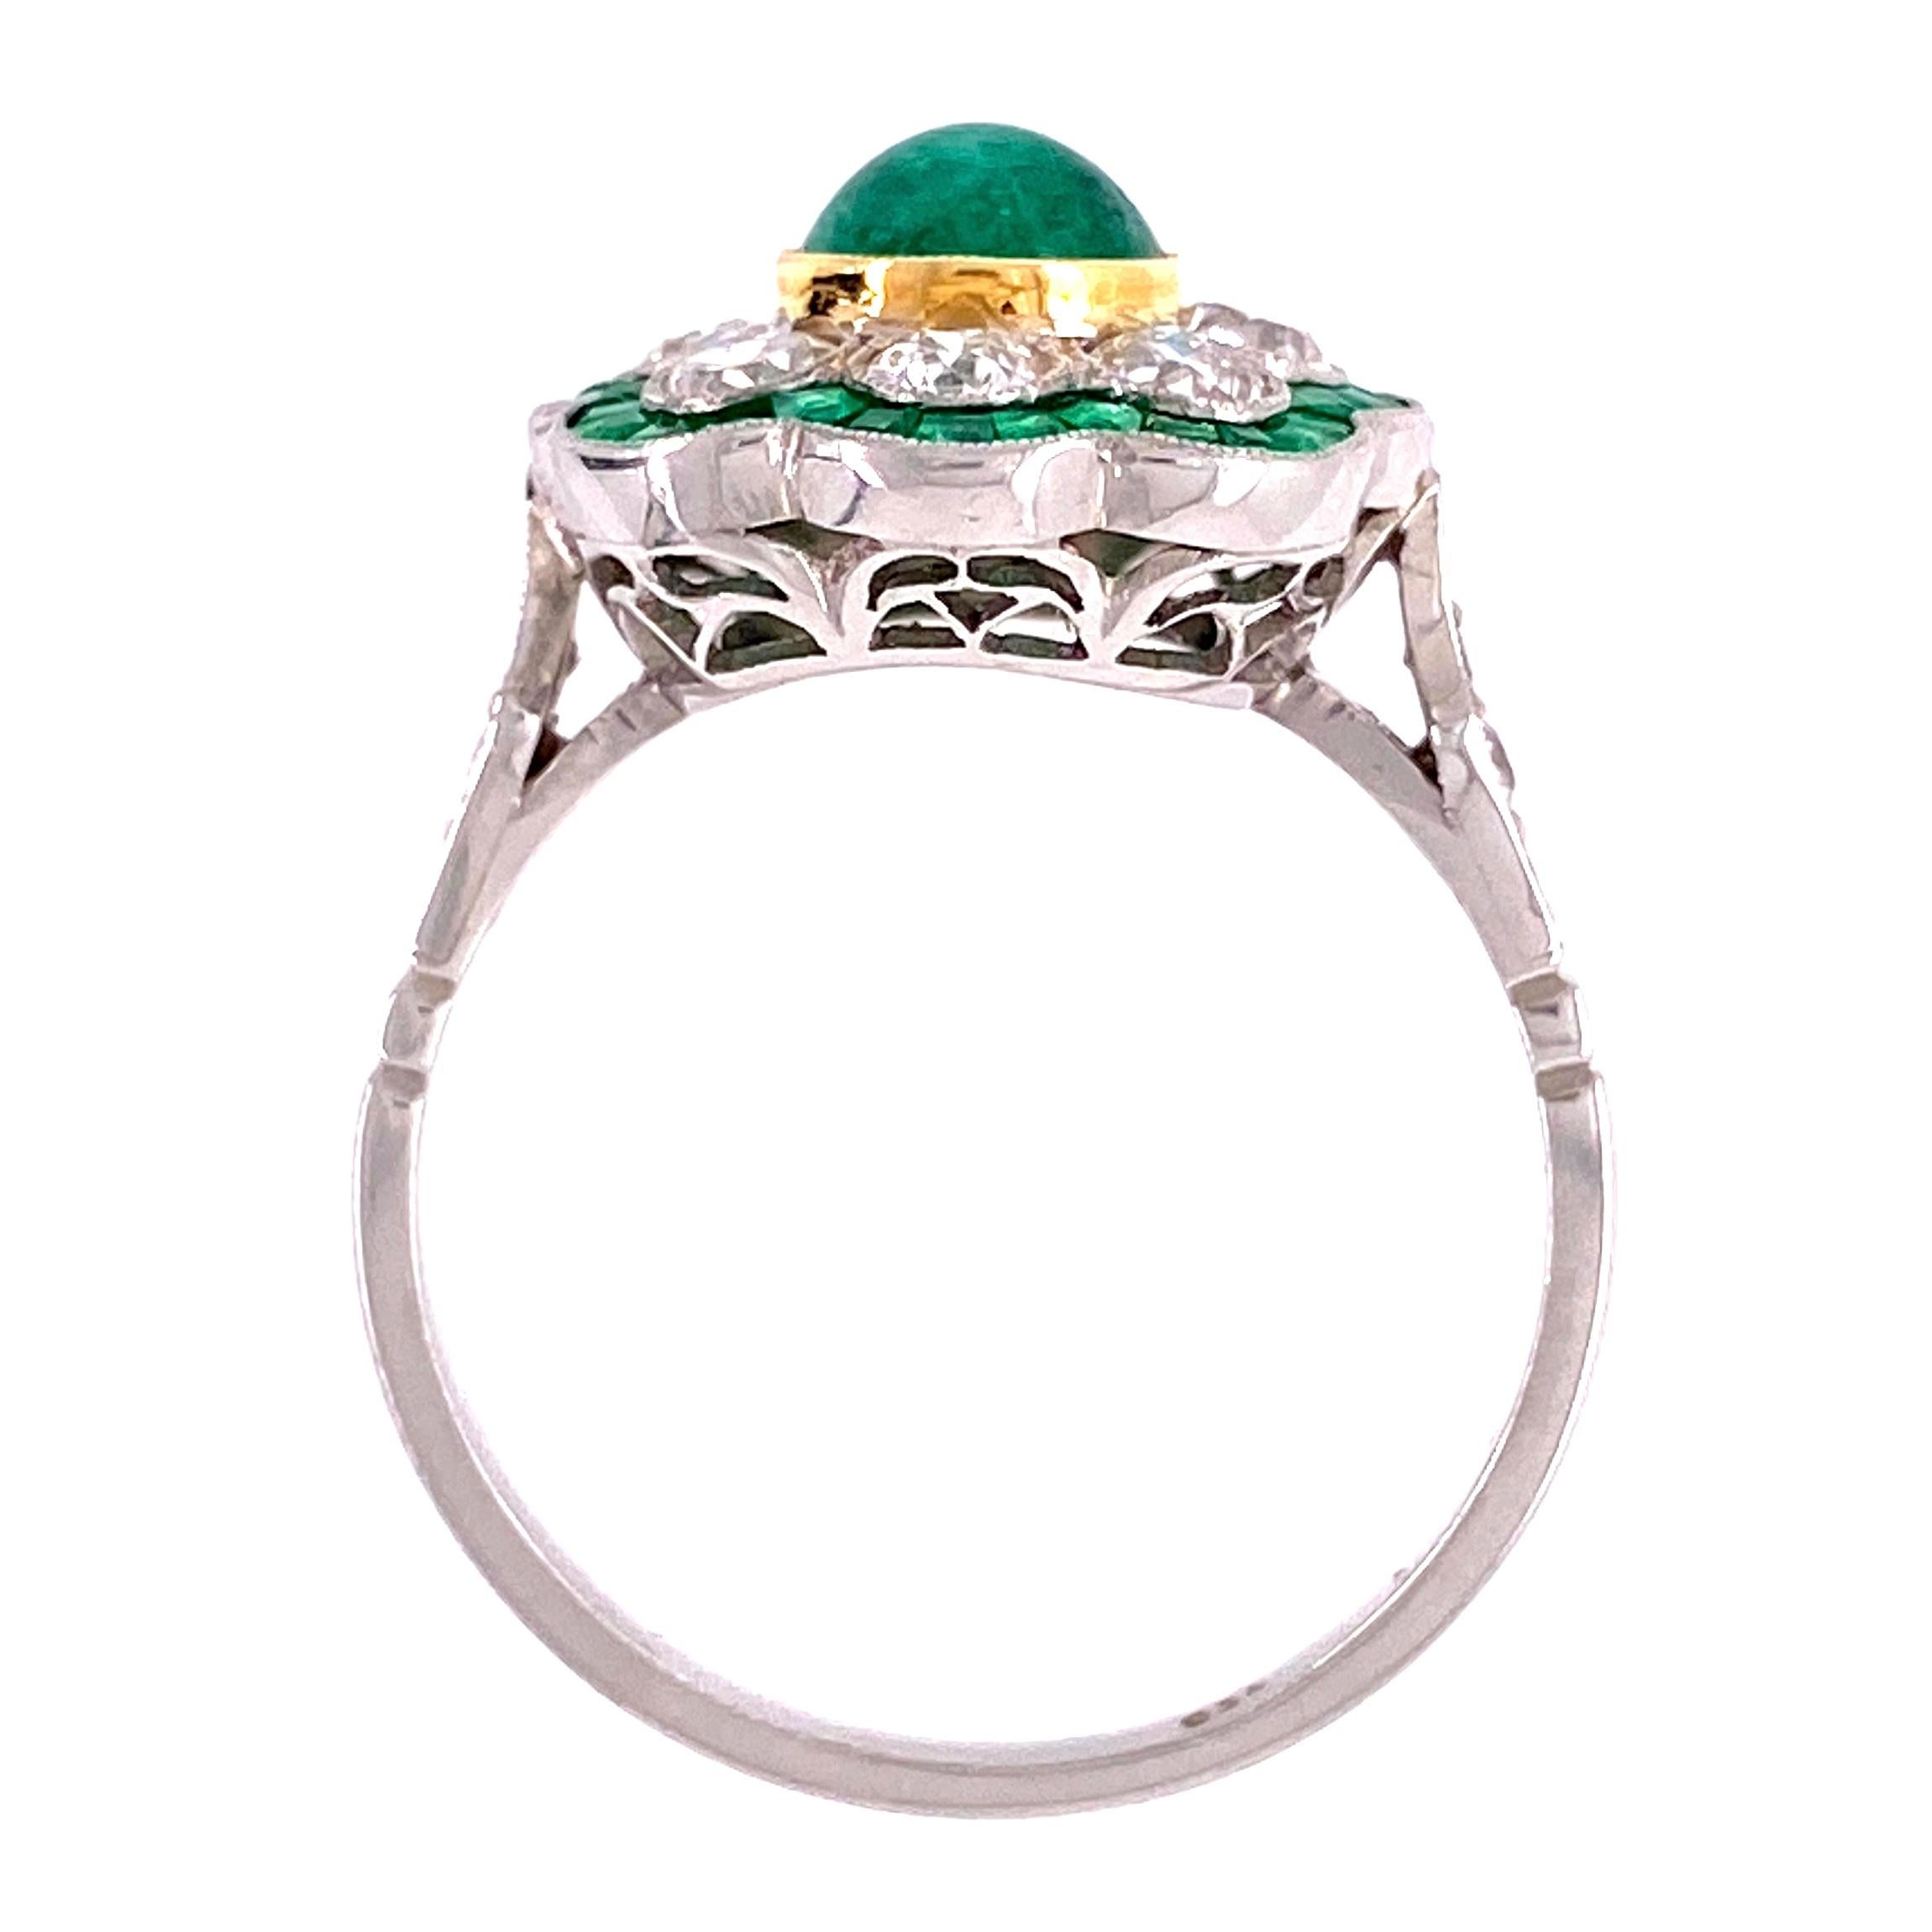 Beautiful, Elegant and finely detailed Art Deco Revival Platinum Ring, center securely nestled with a Green Emerald, surrounded by Diamonds and small Diamonds enhancing the shank and French-cut Emeralds. Approx. total weight of Emeralds 1.69 Carat;